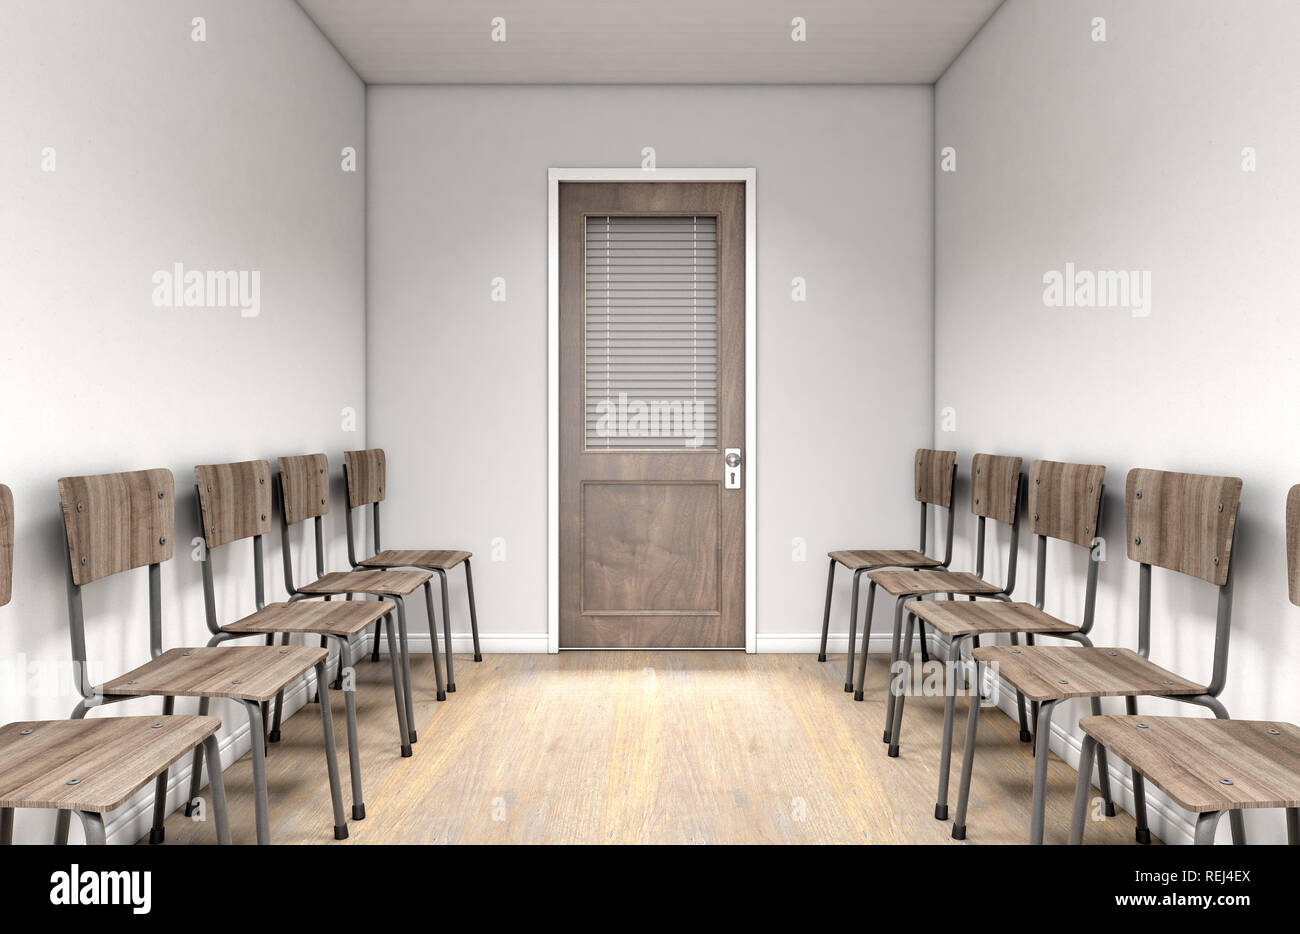 A passage waiting room interior with a shut wooden office door at the far end and chairs lined up on either side  - 3D render Stock Photo